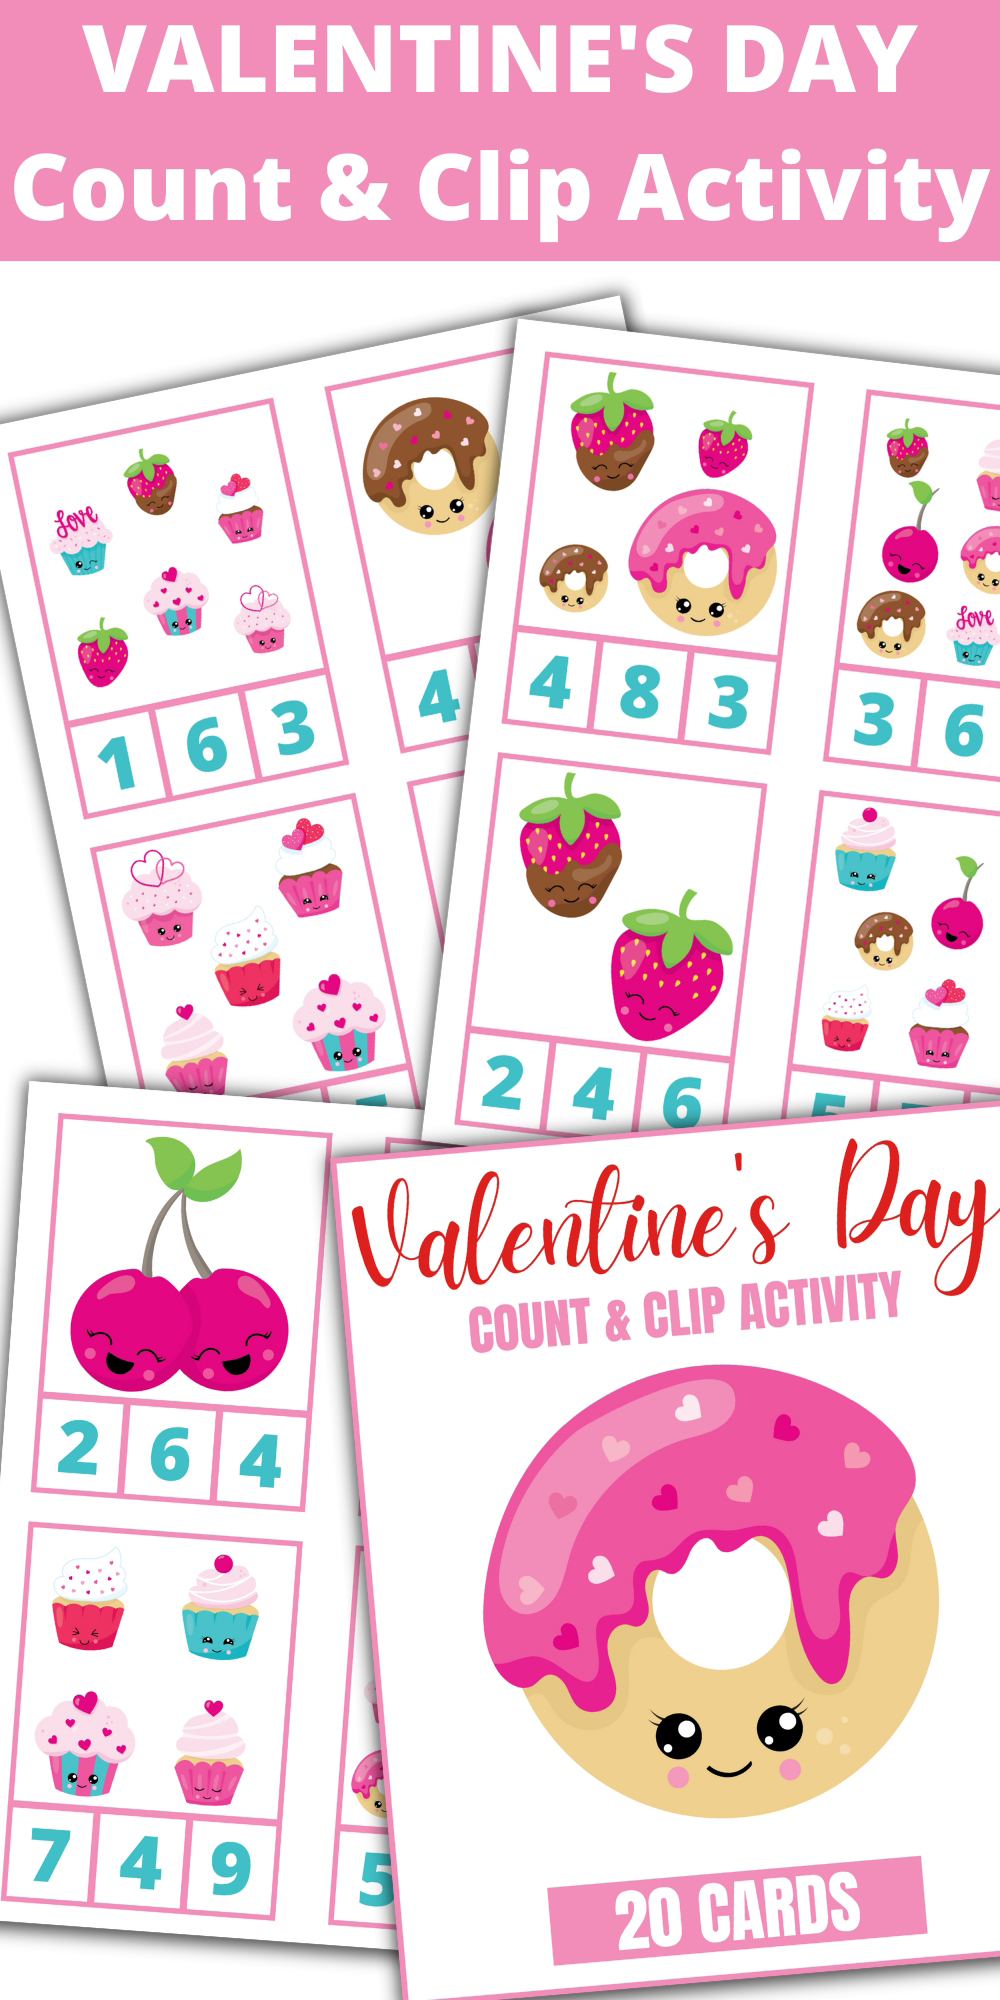 Valentine's Day Count and Clip Activity